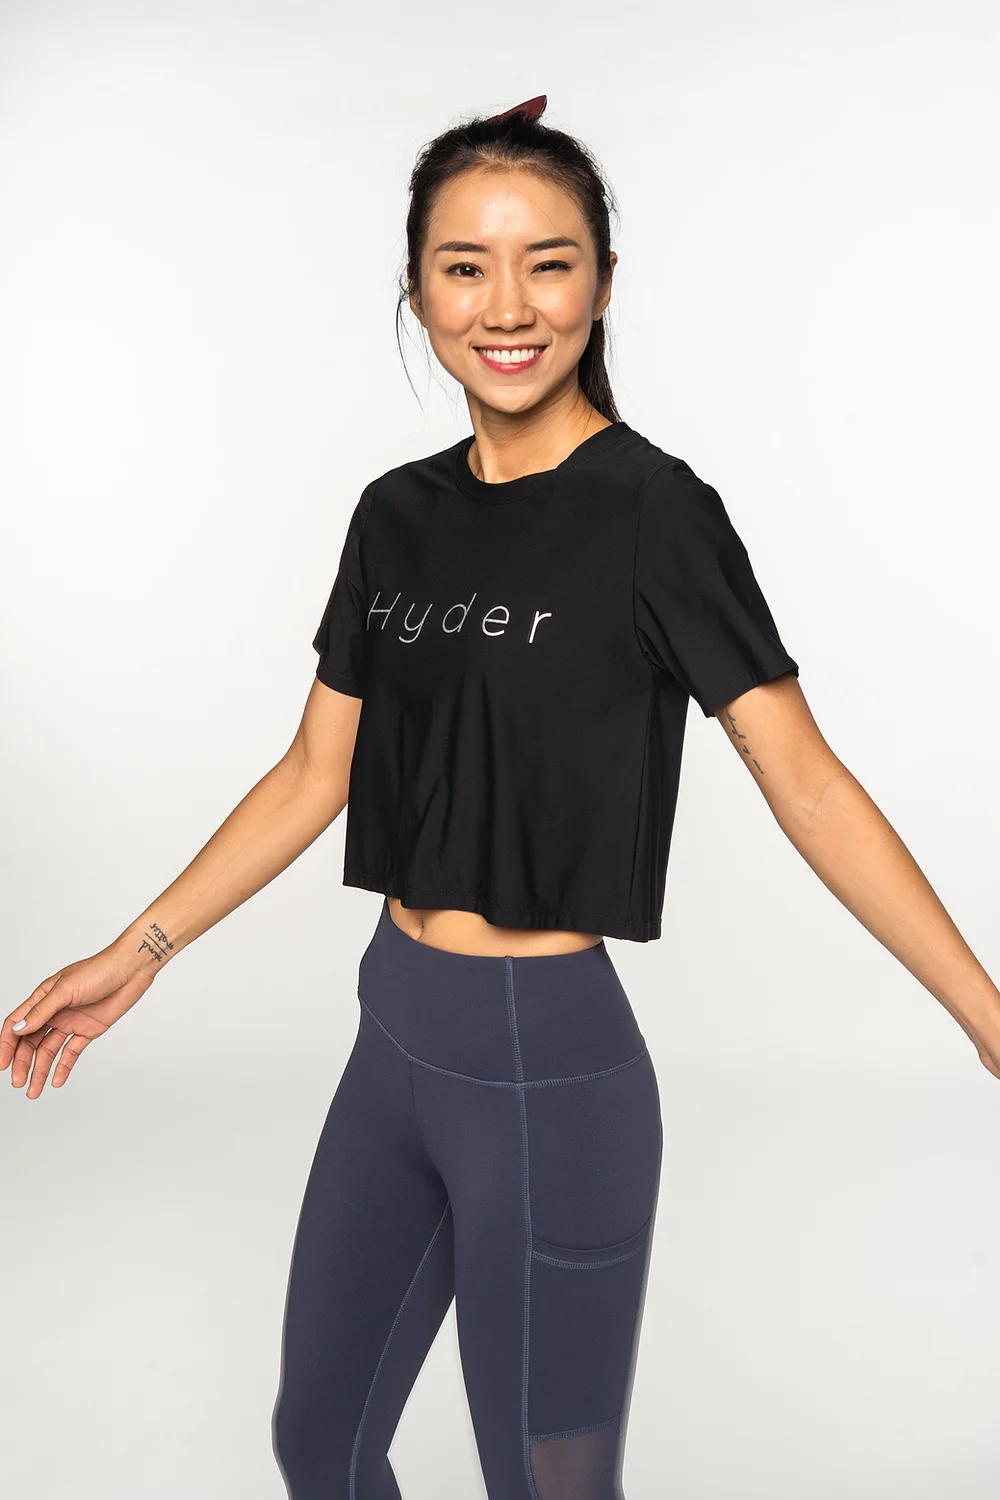 Back-to-basic Crop Top from Hyder - Vulcan Post Label